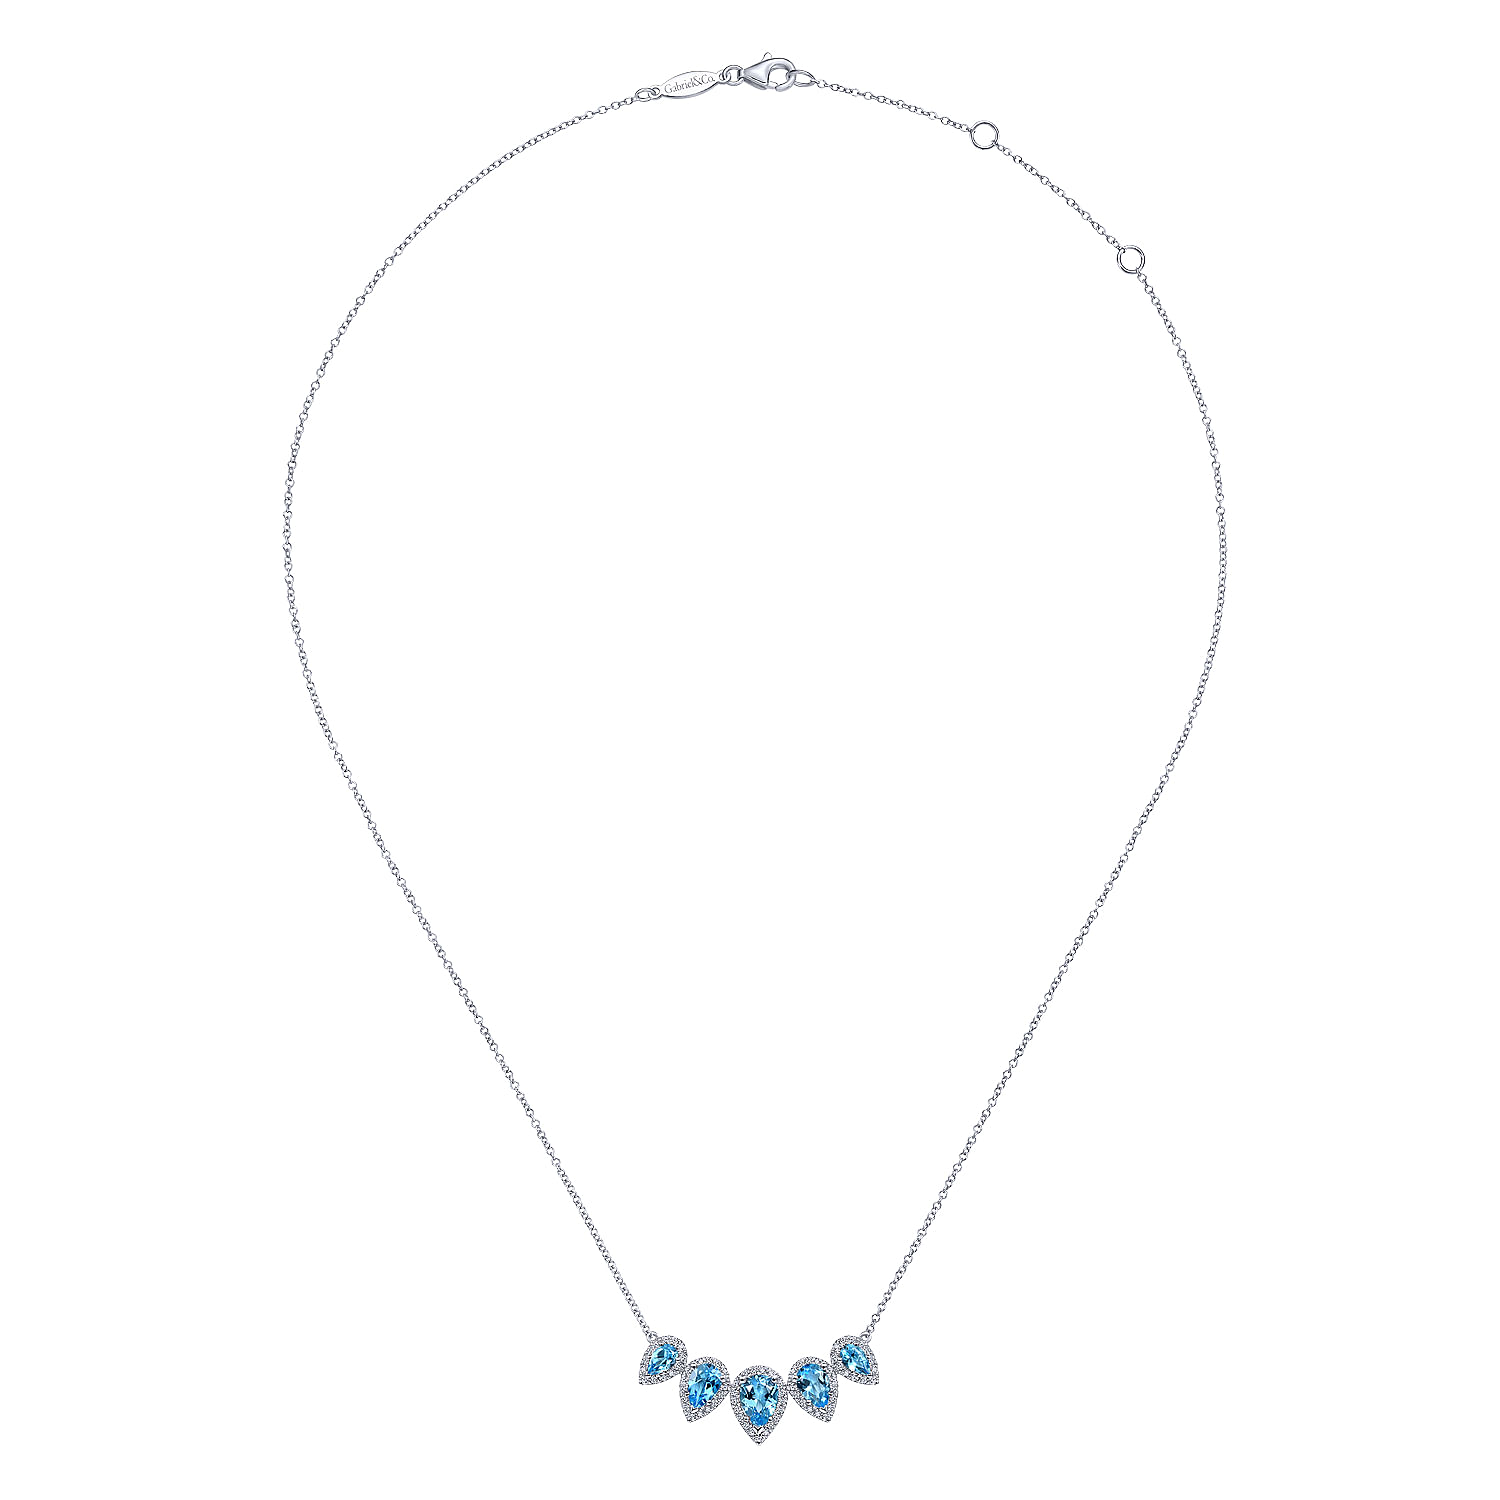 Graduating 14K White Gold Pear Shaped Blue Topaz and Diamond Halo Necklace - 0.35 ct - Shot 2